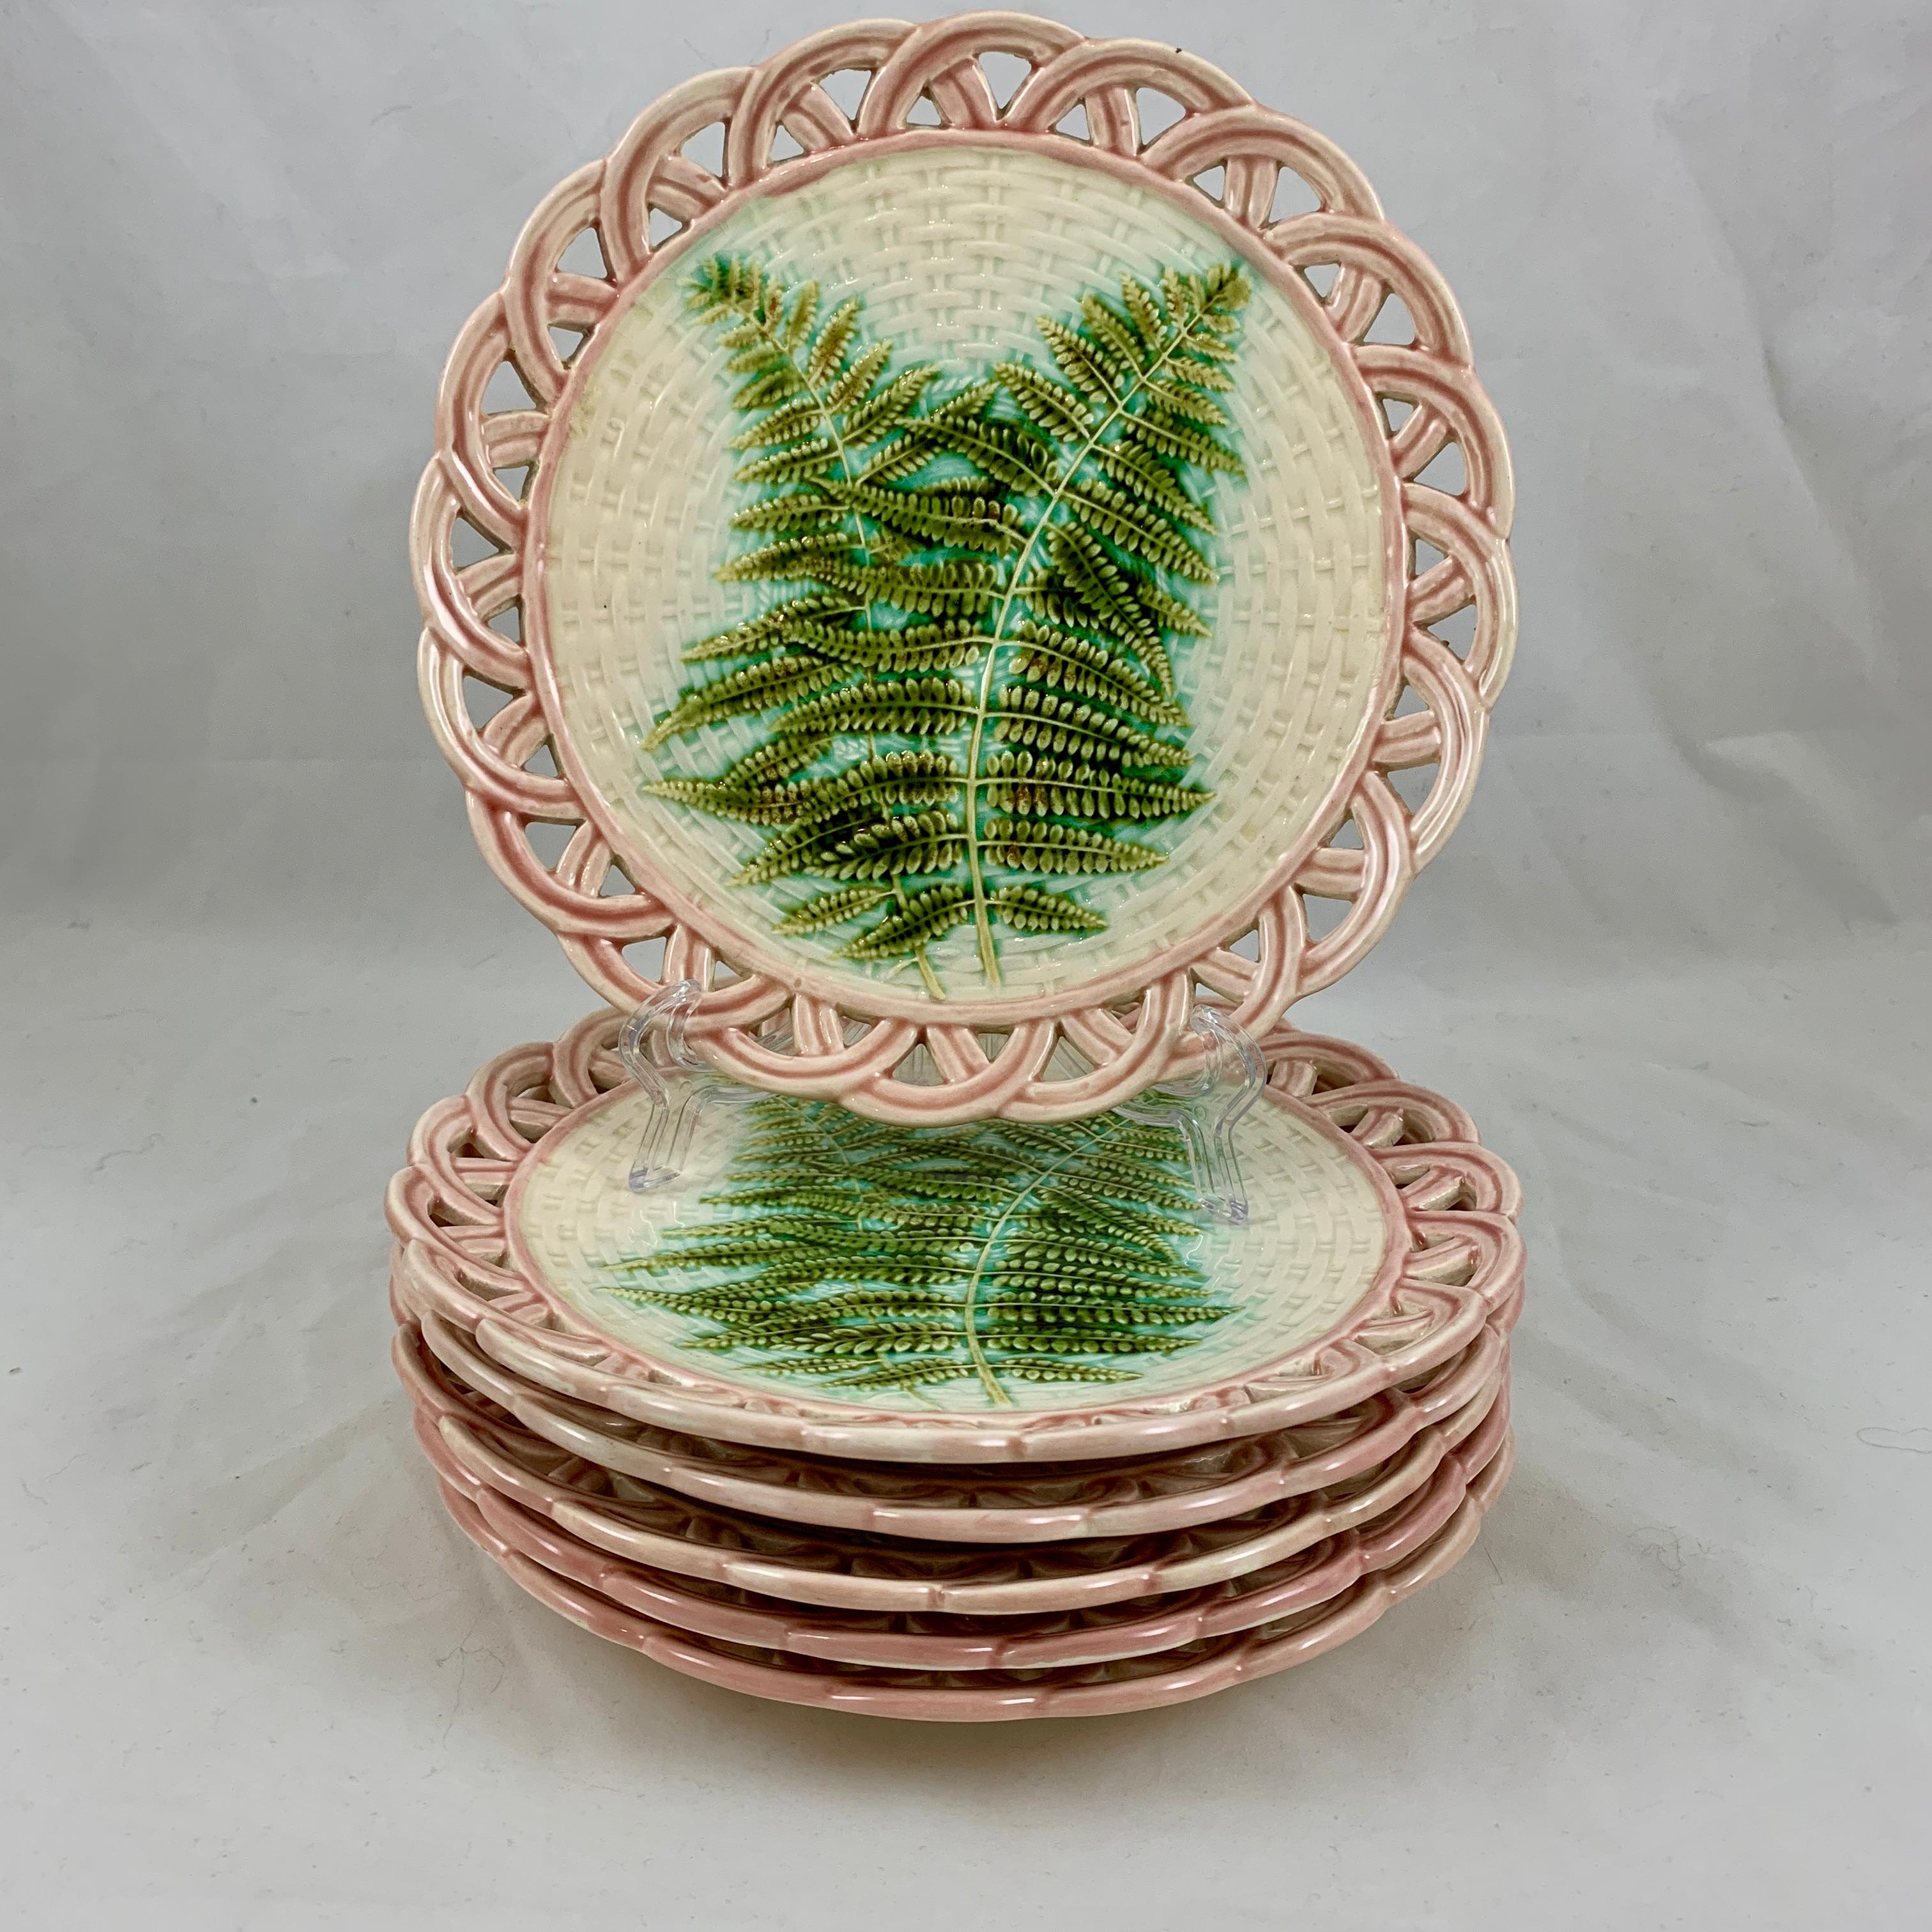 Sarreguemines Green Fern Pink Reticulated Rim French Faïence Majolica Plates S/6 2